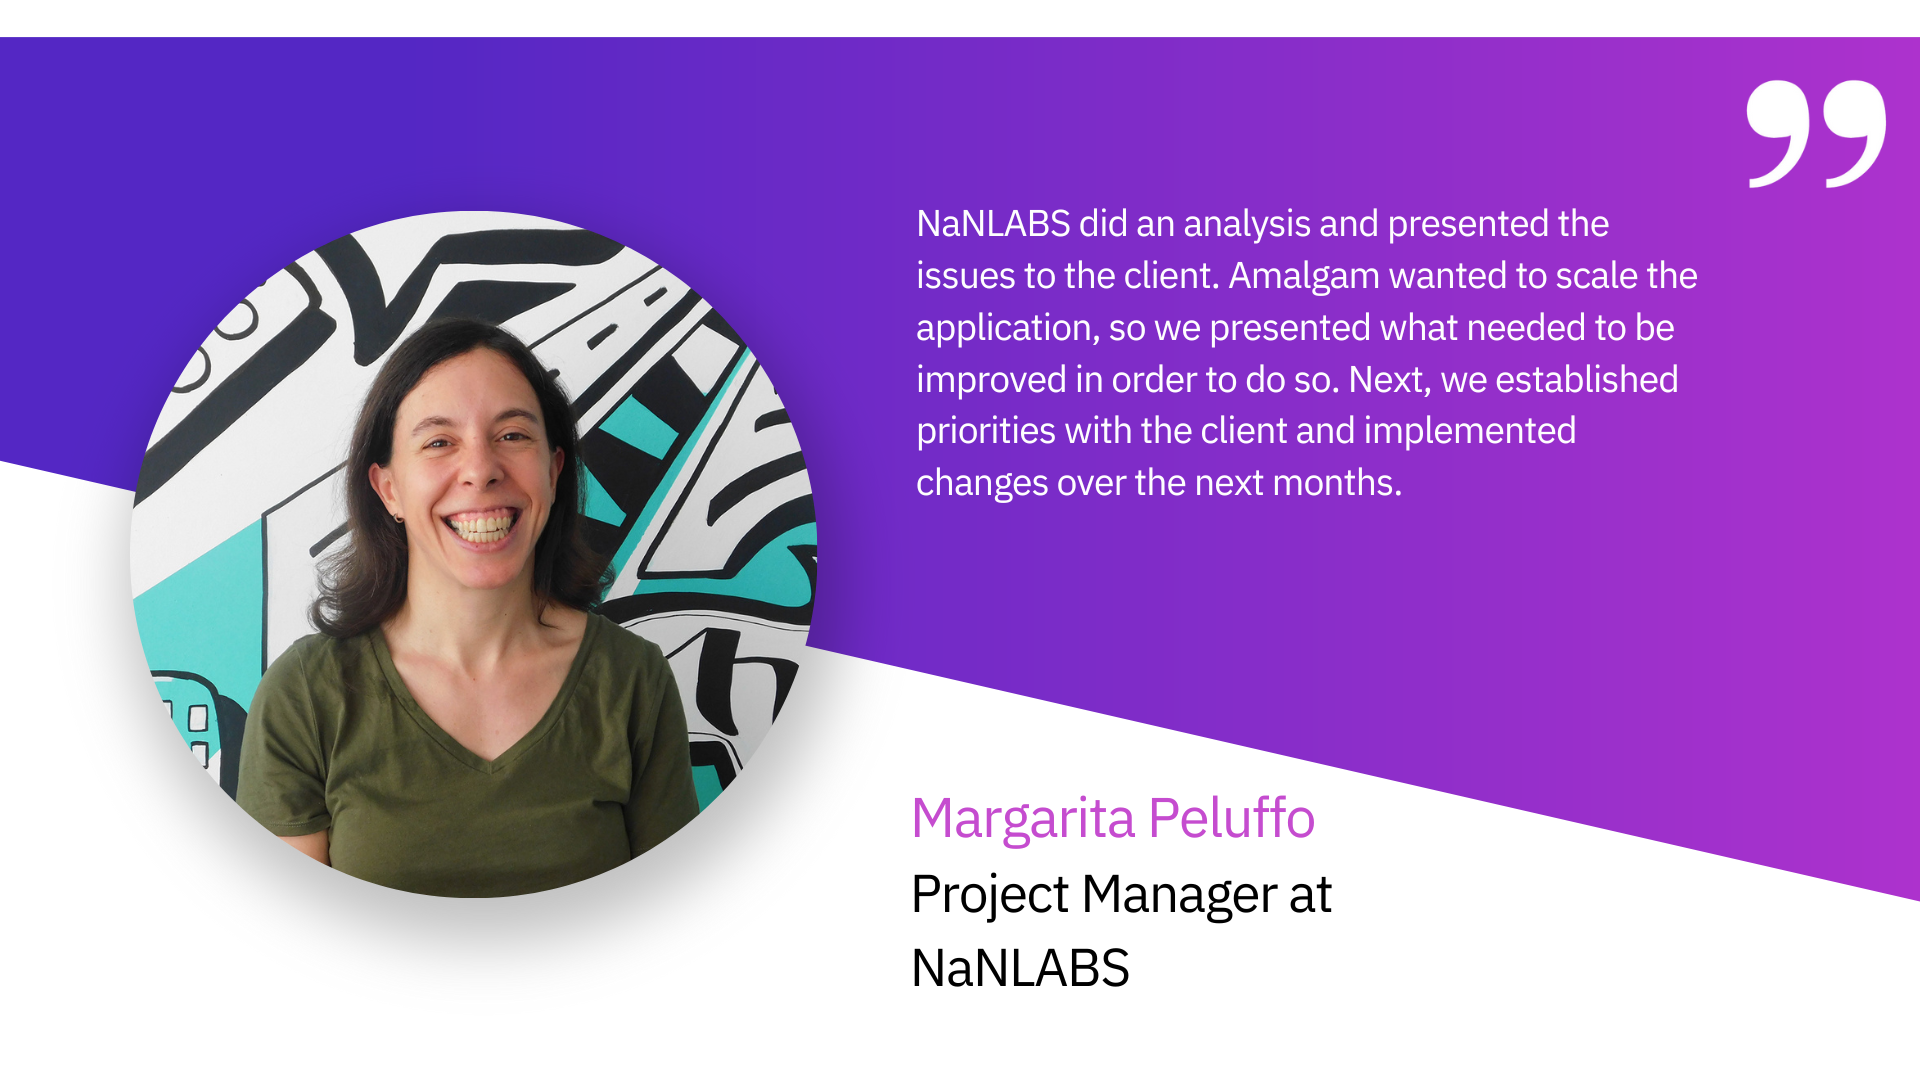 Scale Your Business with Enterprise level Software - quote from Margarita Peluffo, Project Manager at NaNLABS about scaling up Amalgam’s MVP to enterprise level software